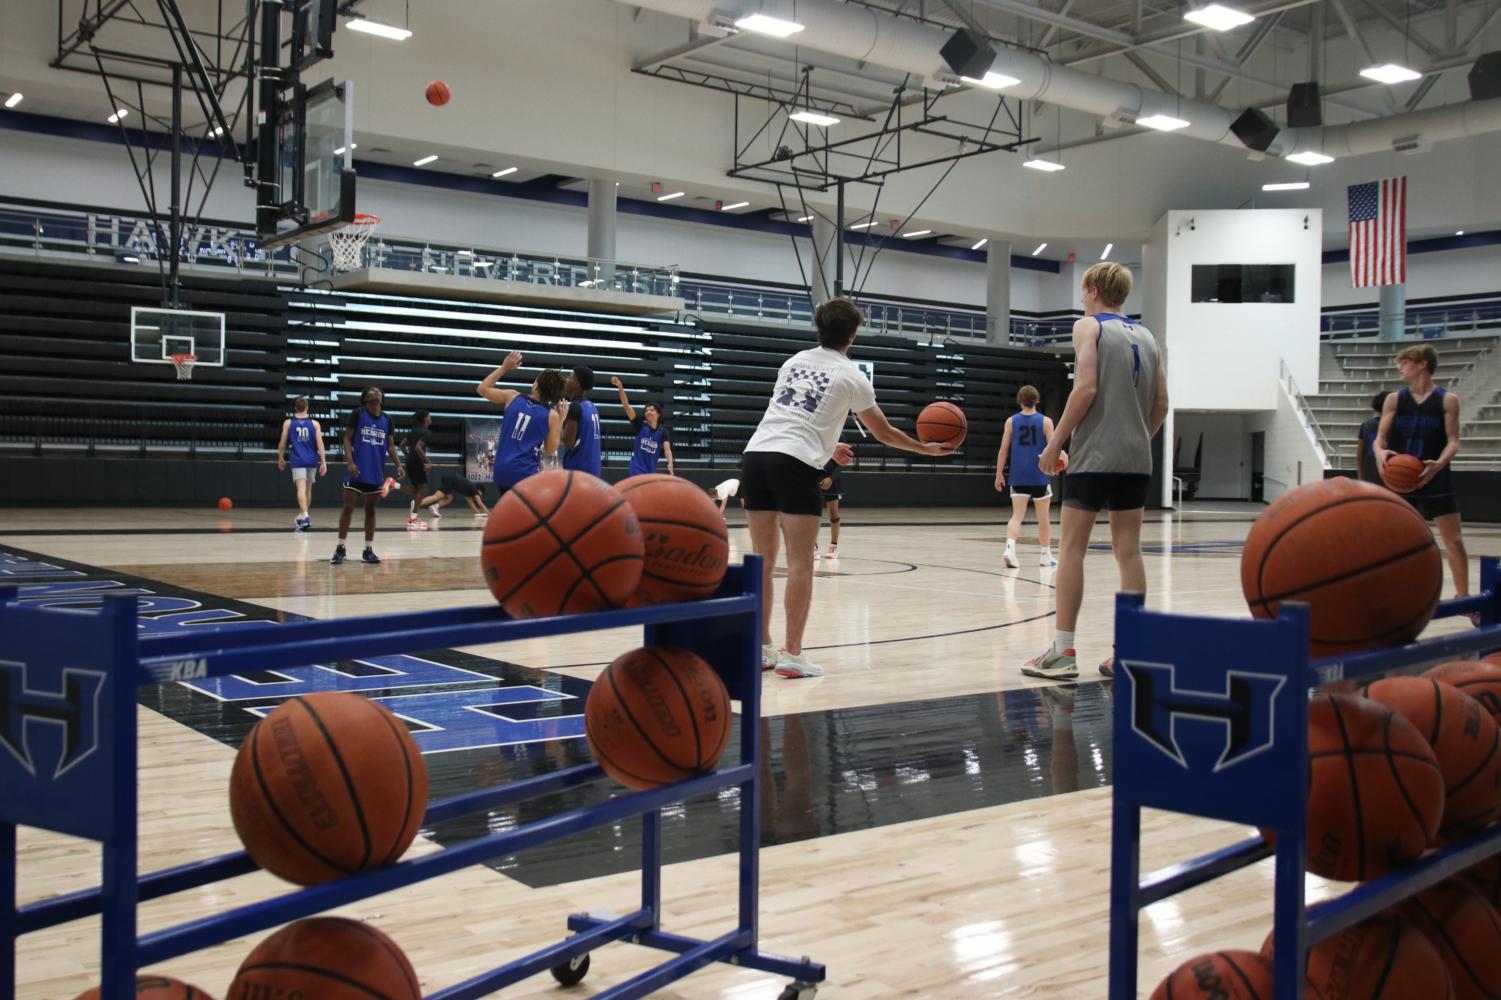 The team practices for its first game against Little Elm on Nov. 9. Head coach Eric Reil said the team’s preseason has mainly consisted of getting ready through using the weight room and getting healthier.